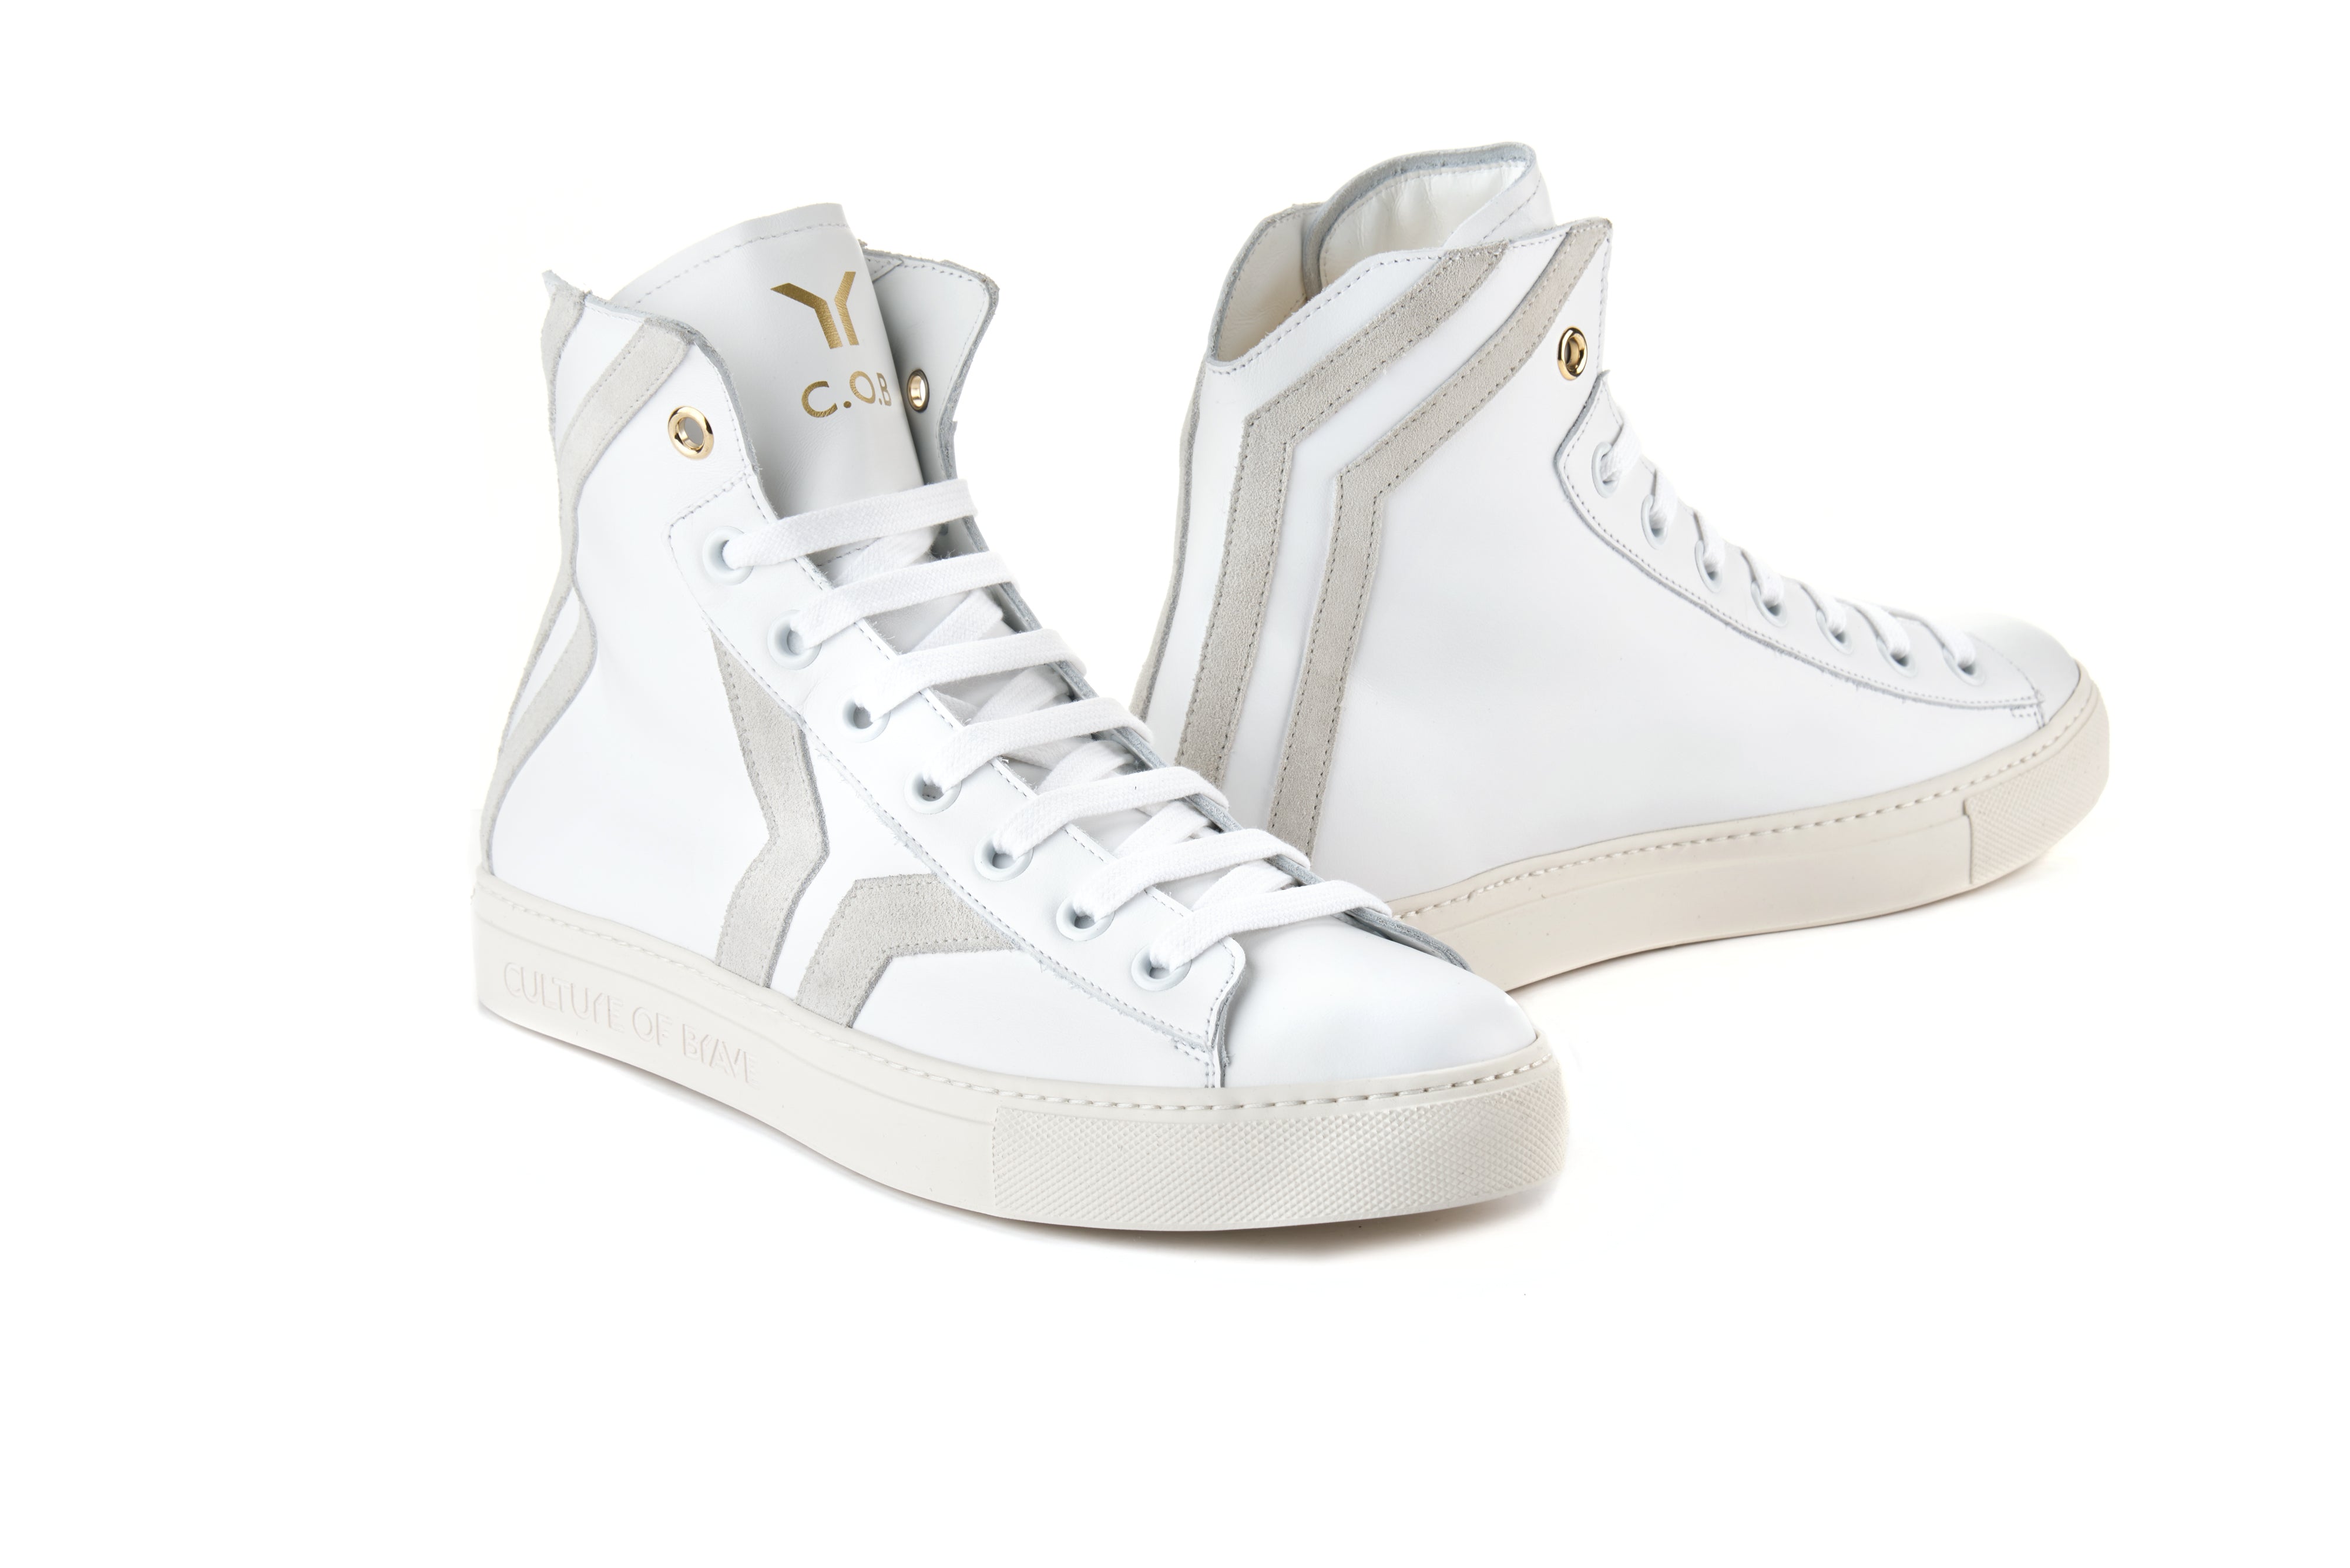 Resilient S17 Women White leather offwhite wing mid cut